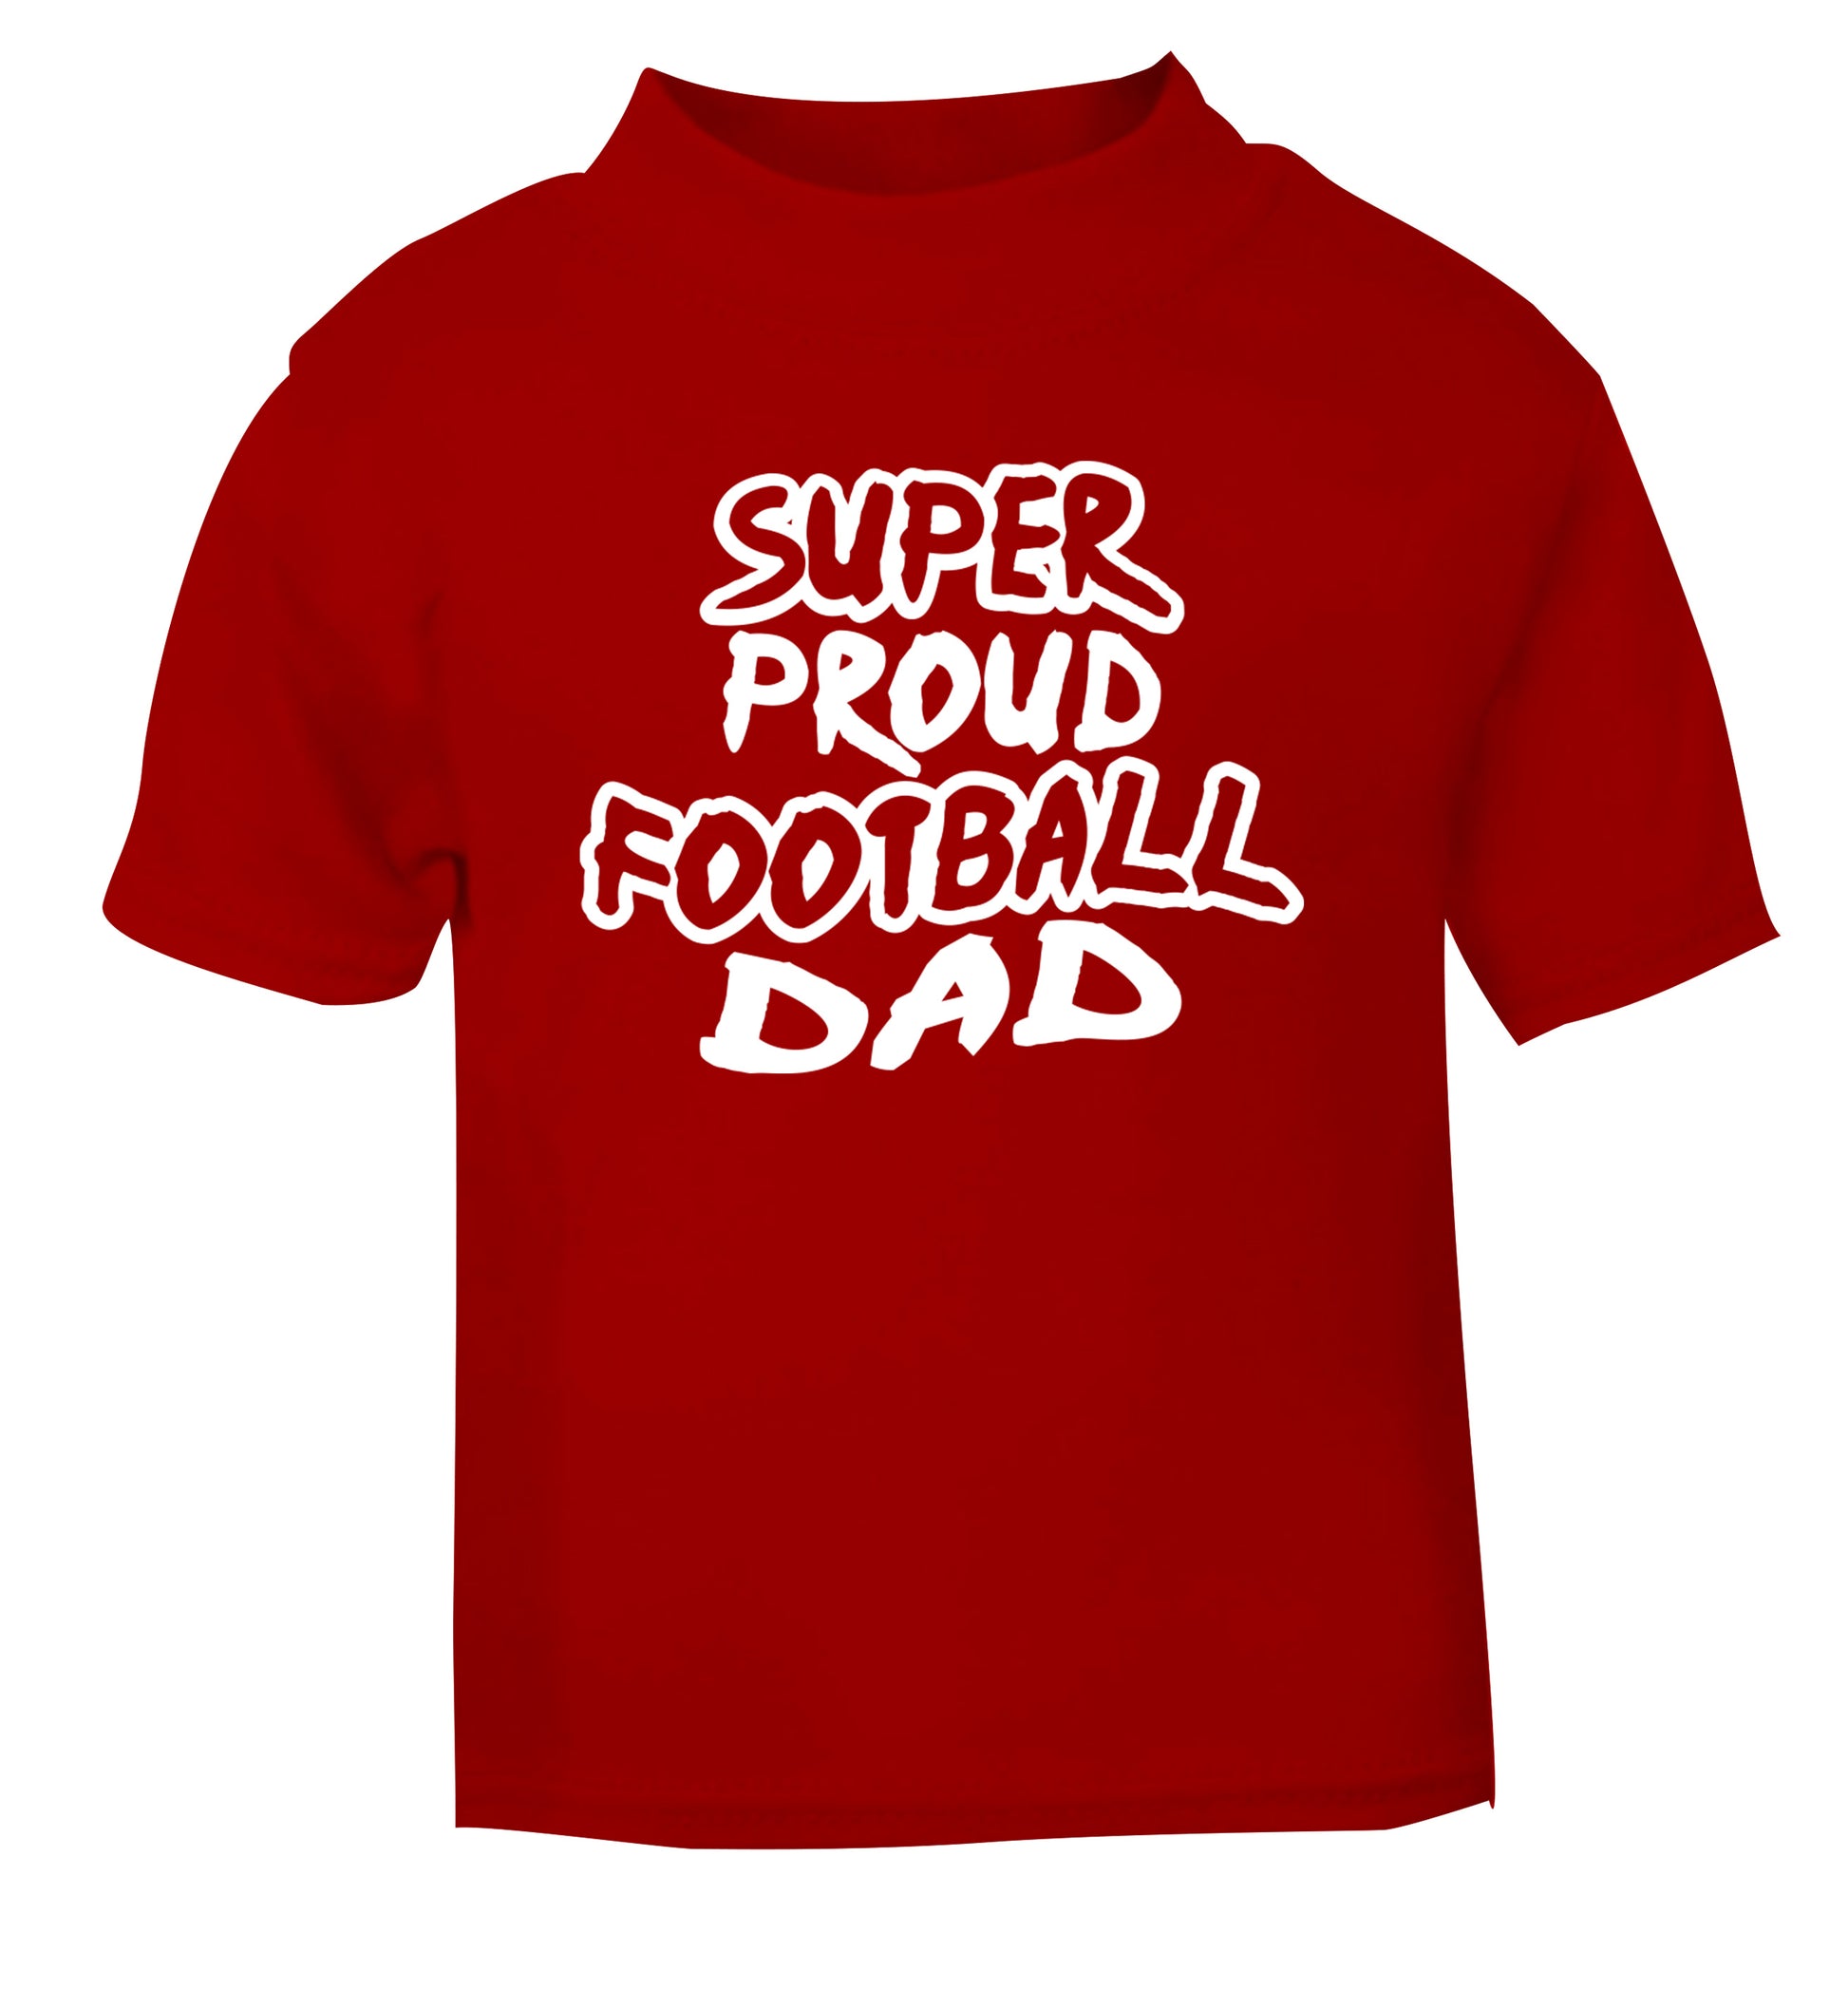 Super proud football dad red Baby Toddler Tshirt 2 Years